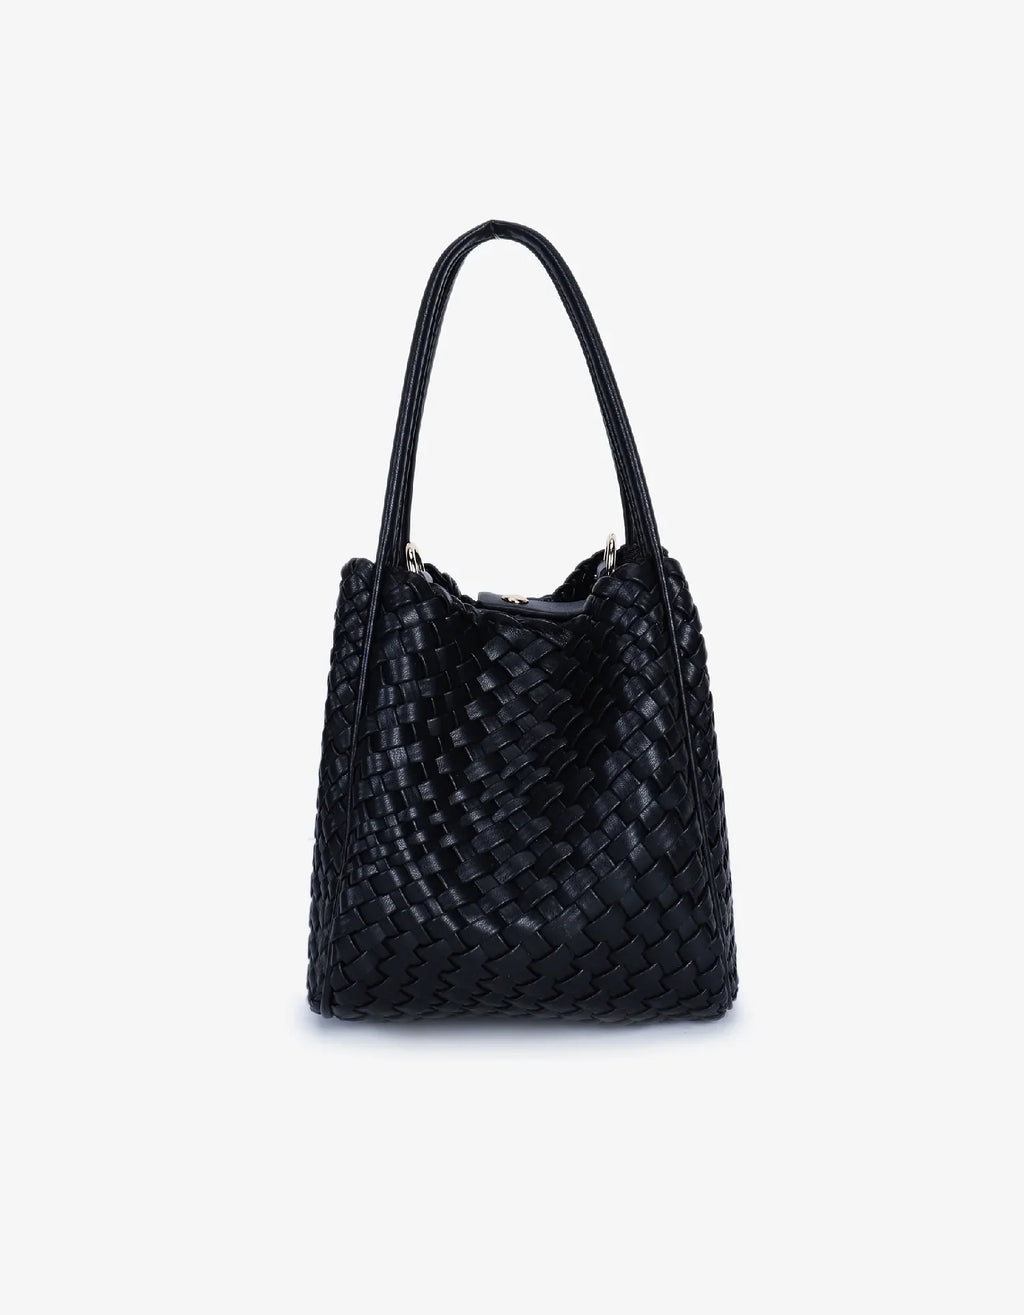 REMI/REID Hollace Mini Tote Toy Woven in Black